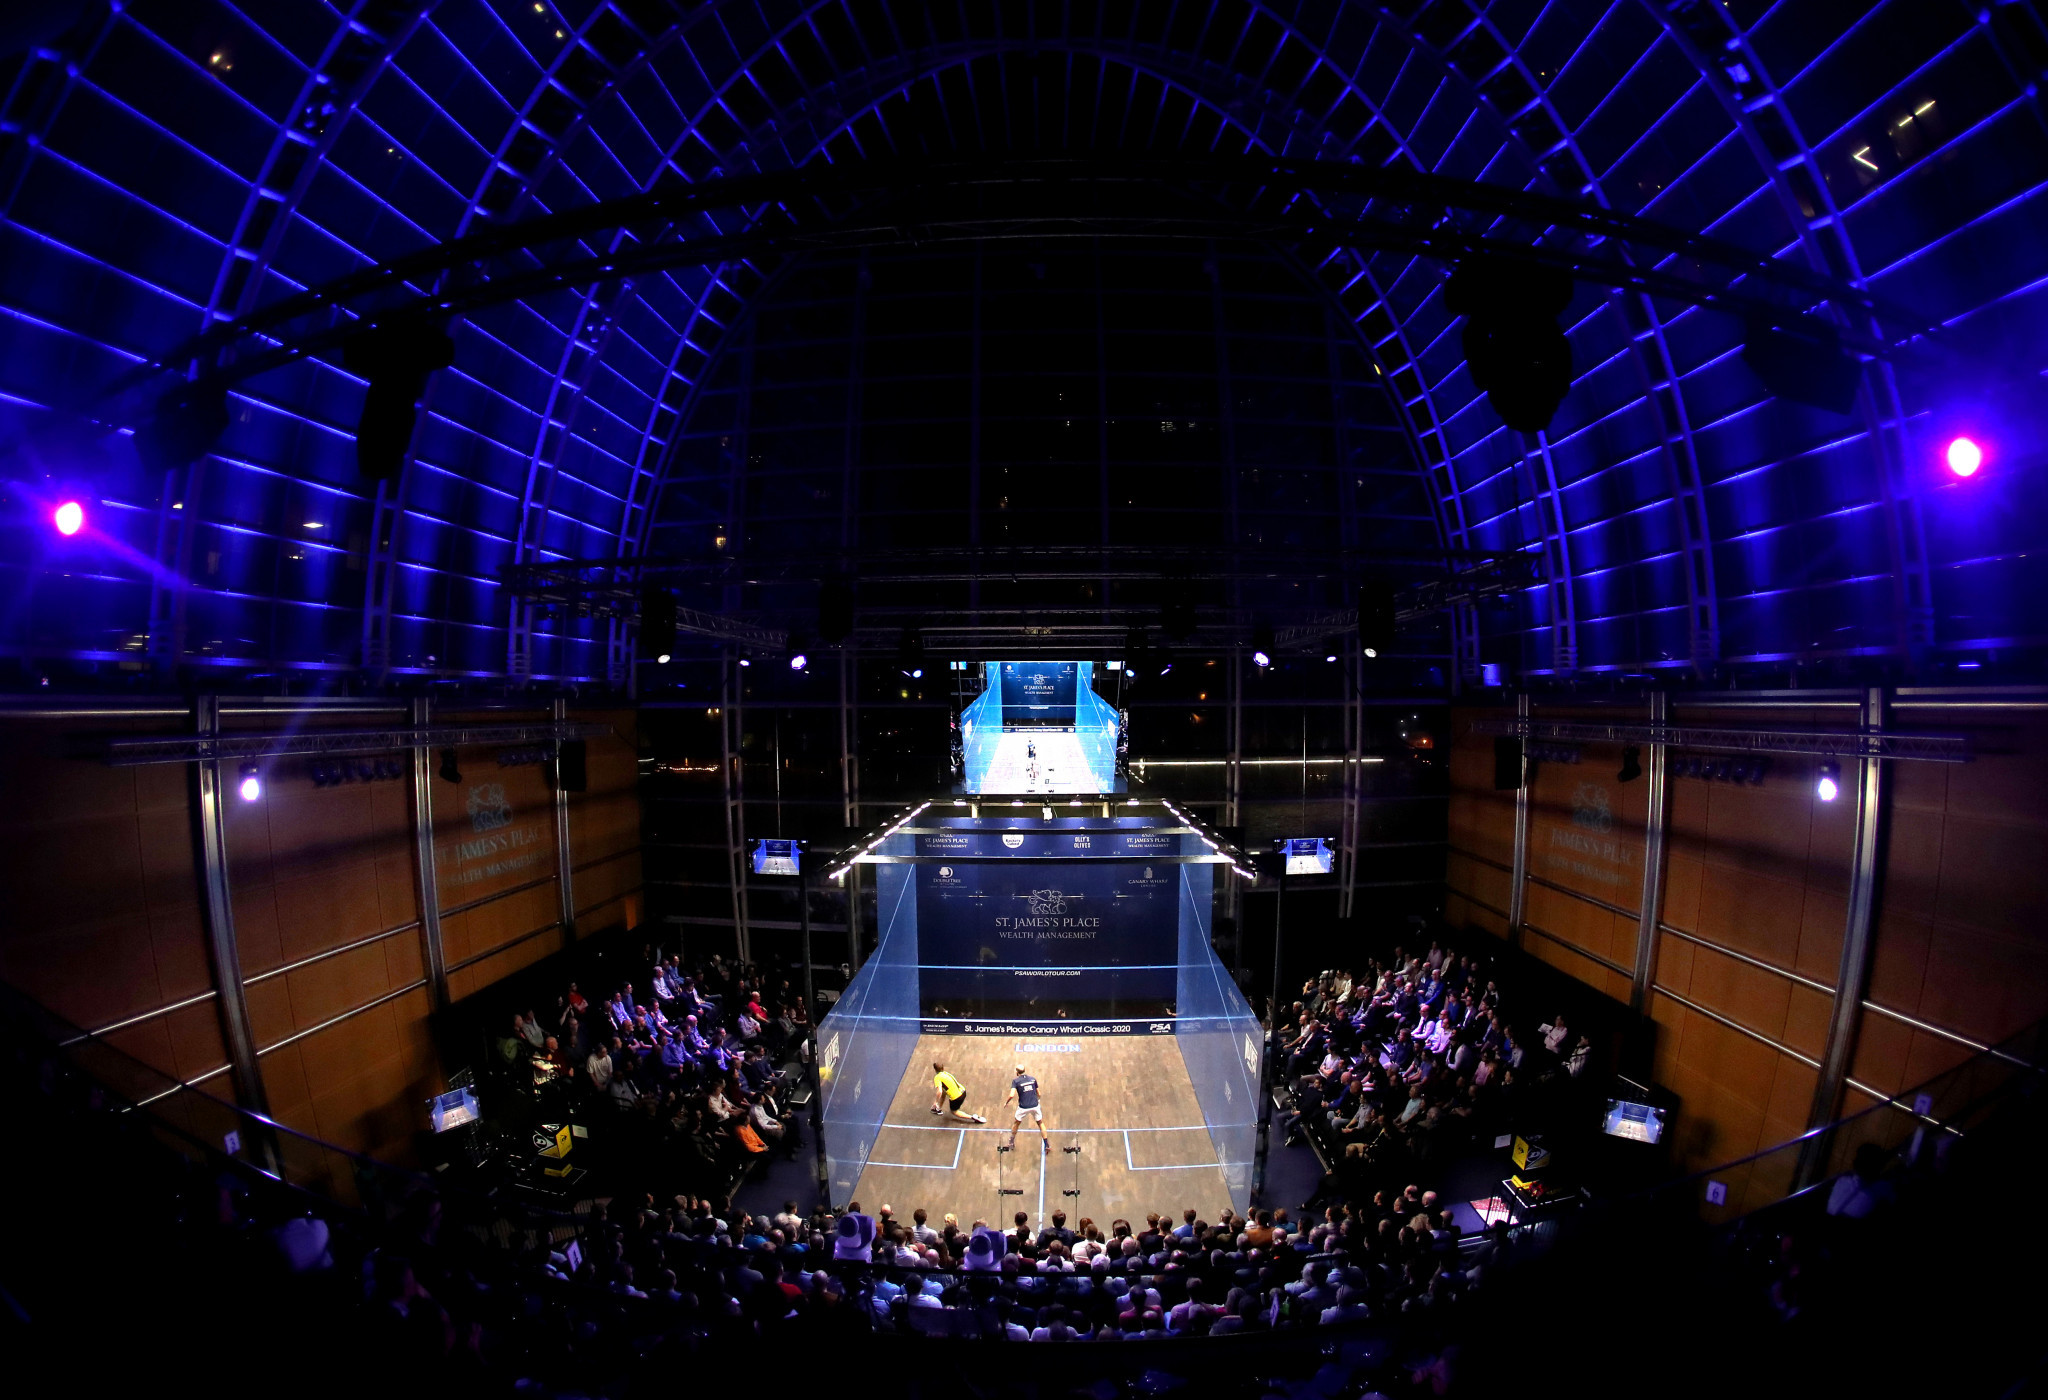 London's East Wintergarden is set to host the Canary Wharf Classic ©Getty Images